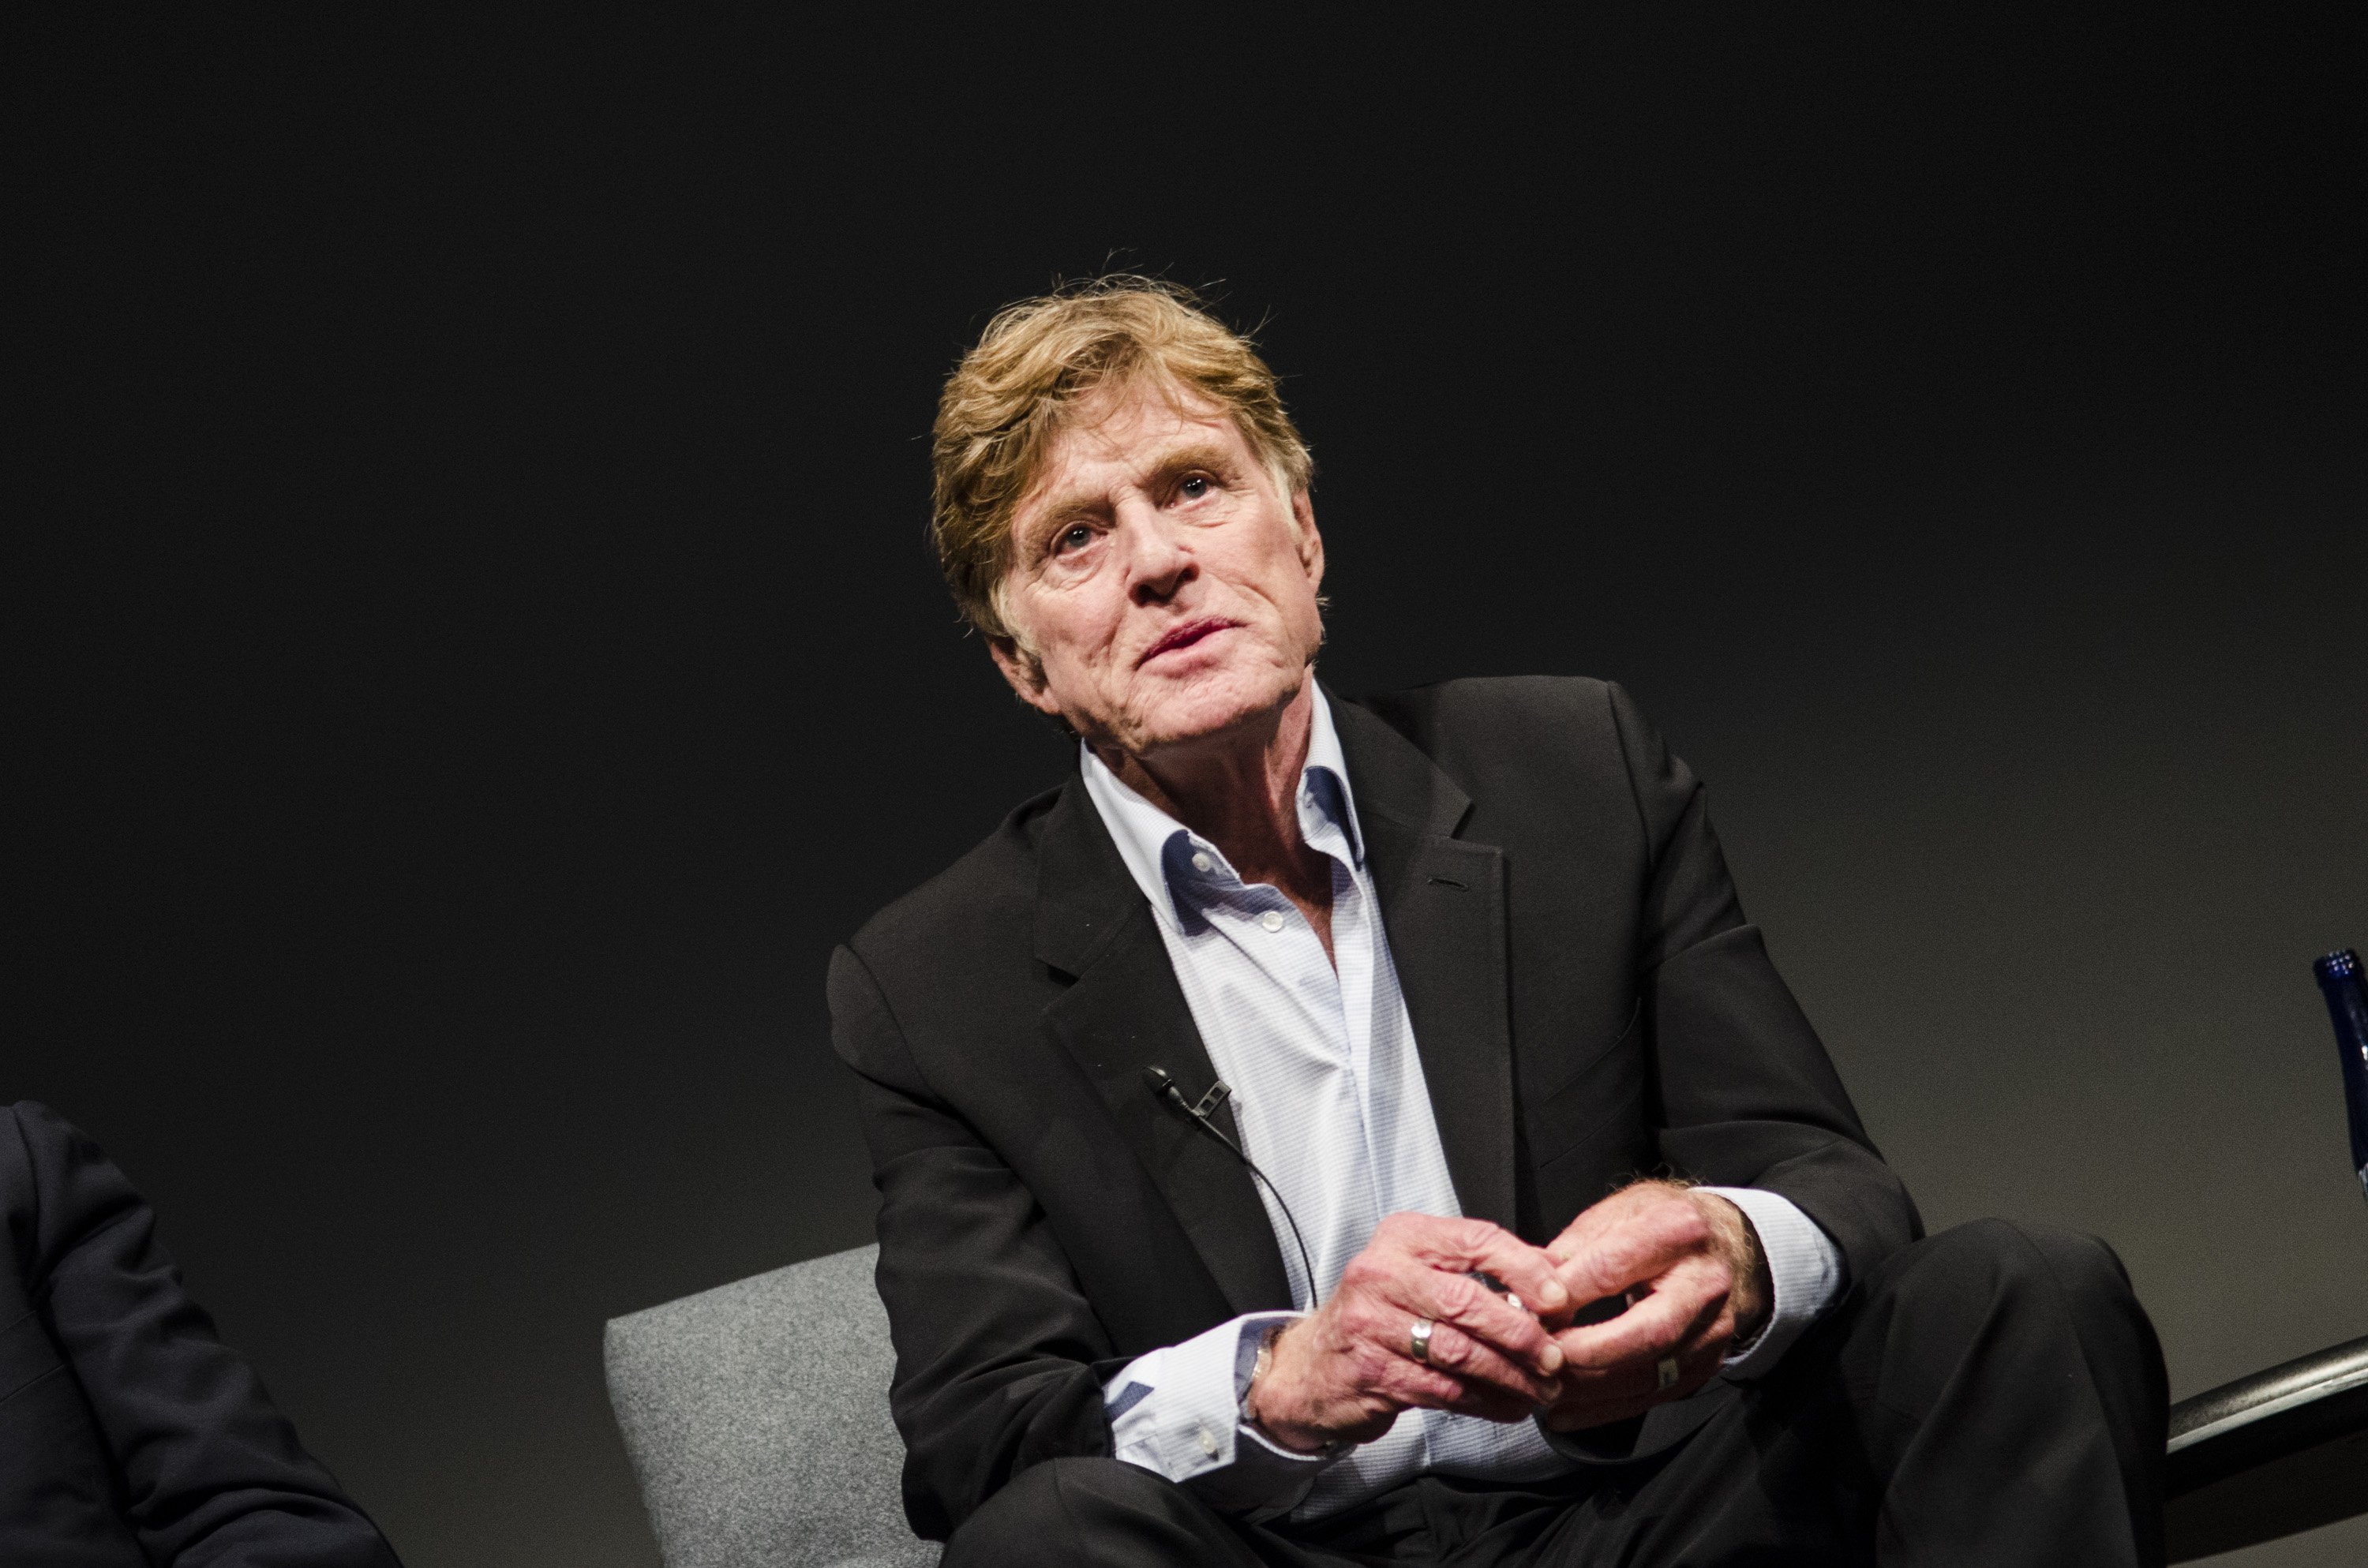 Robert Redford at The Newseum on April 18, 2013 | Photo: Getty Images